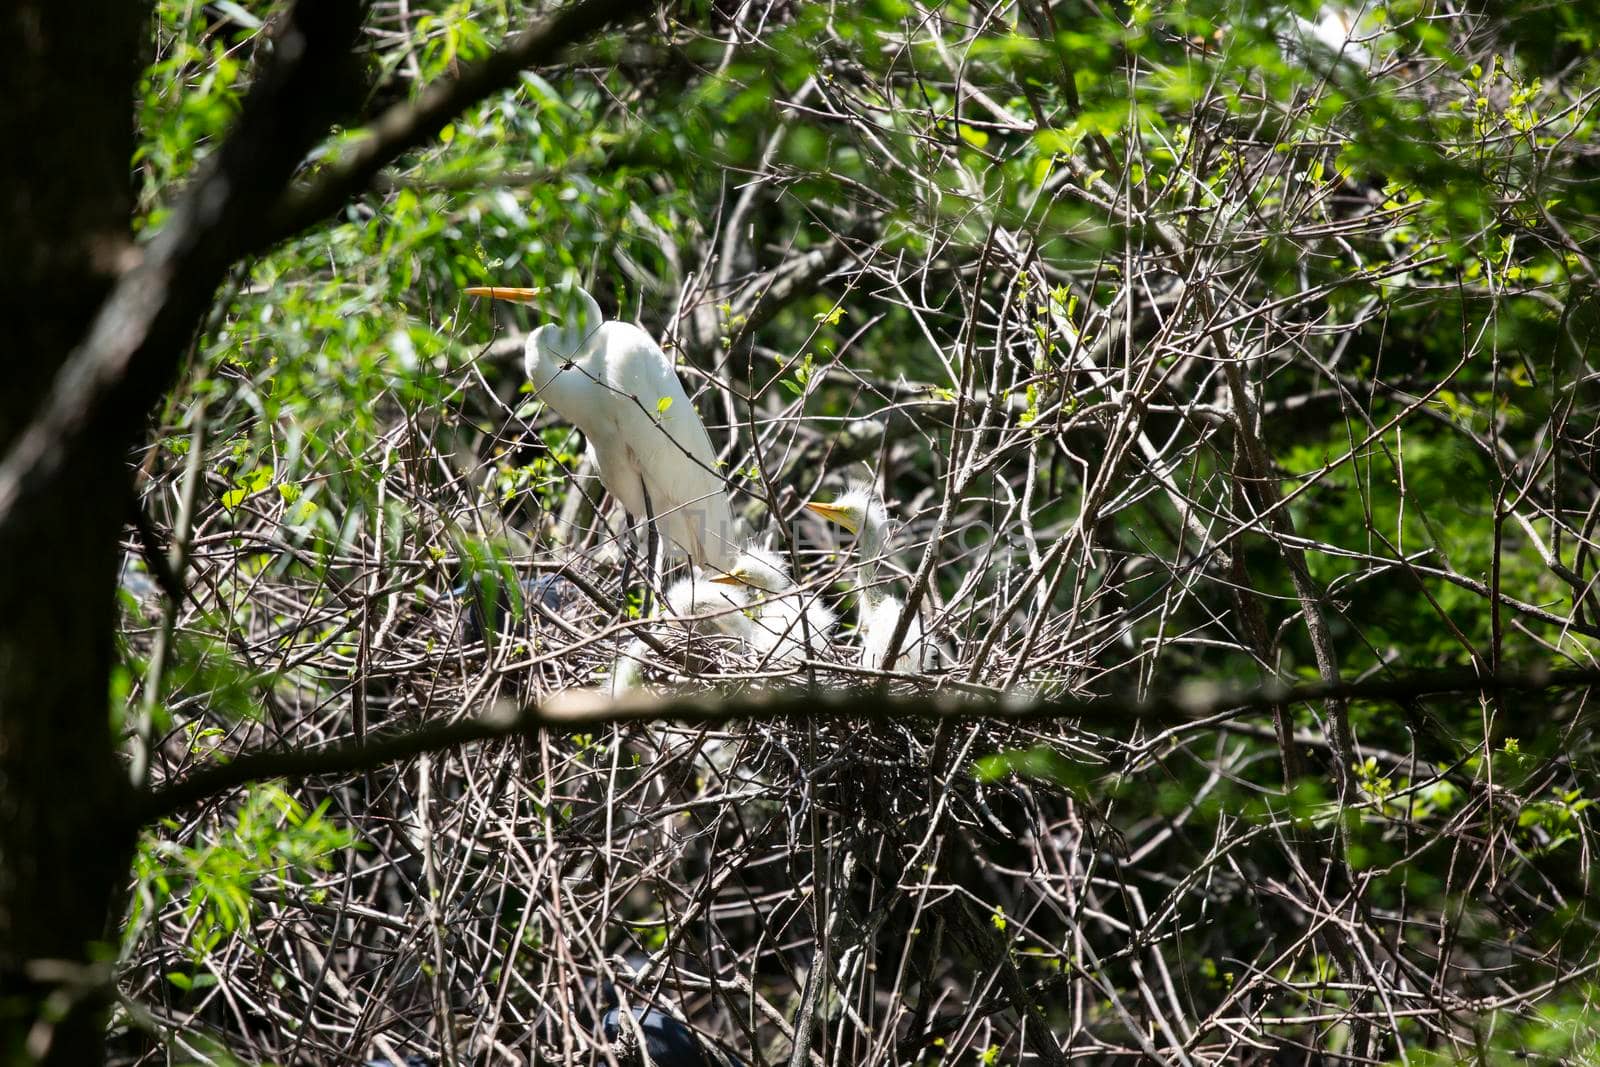 Great egret (Ardea alba) parent watching over its chicks